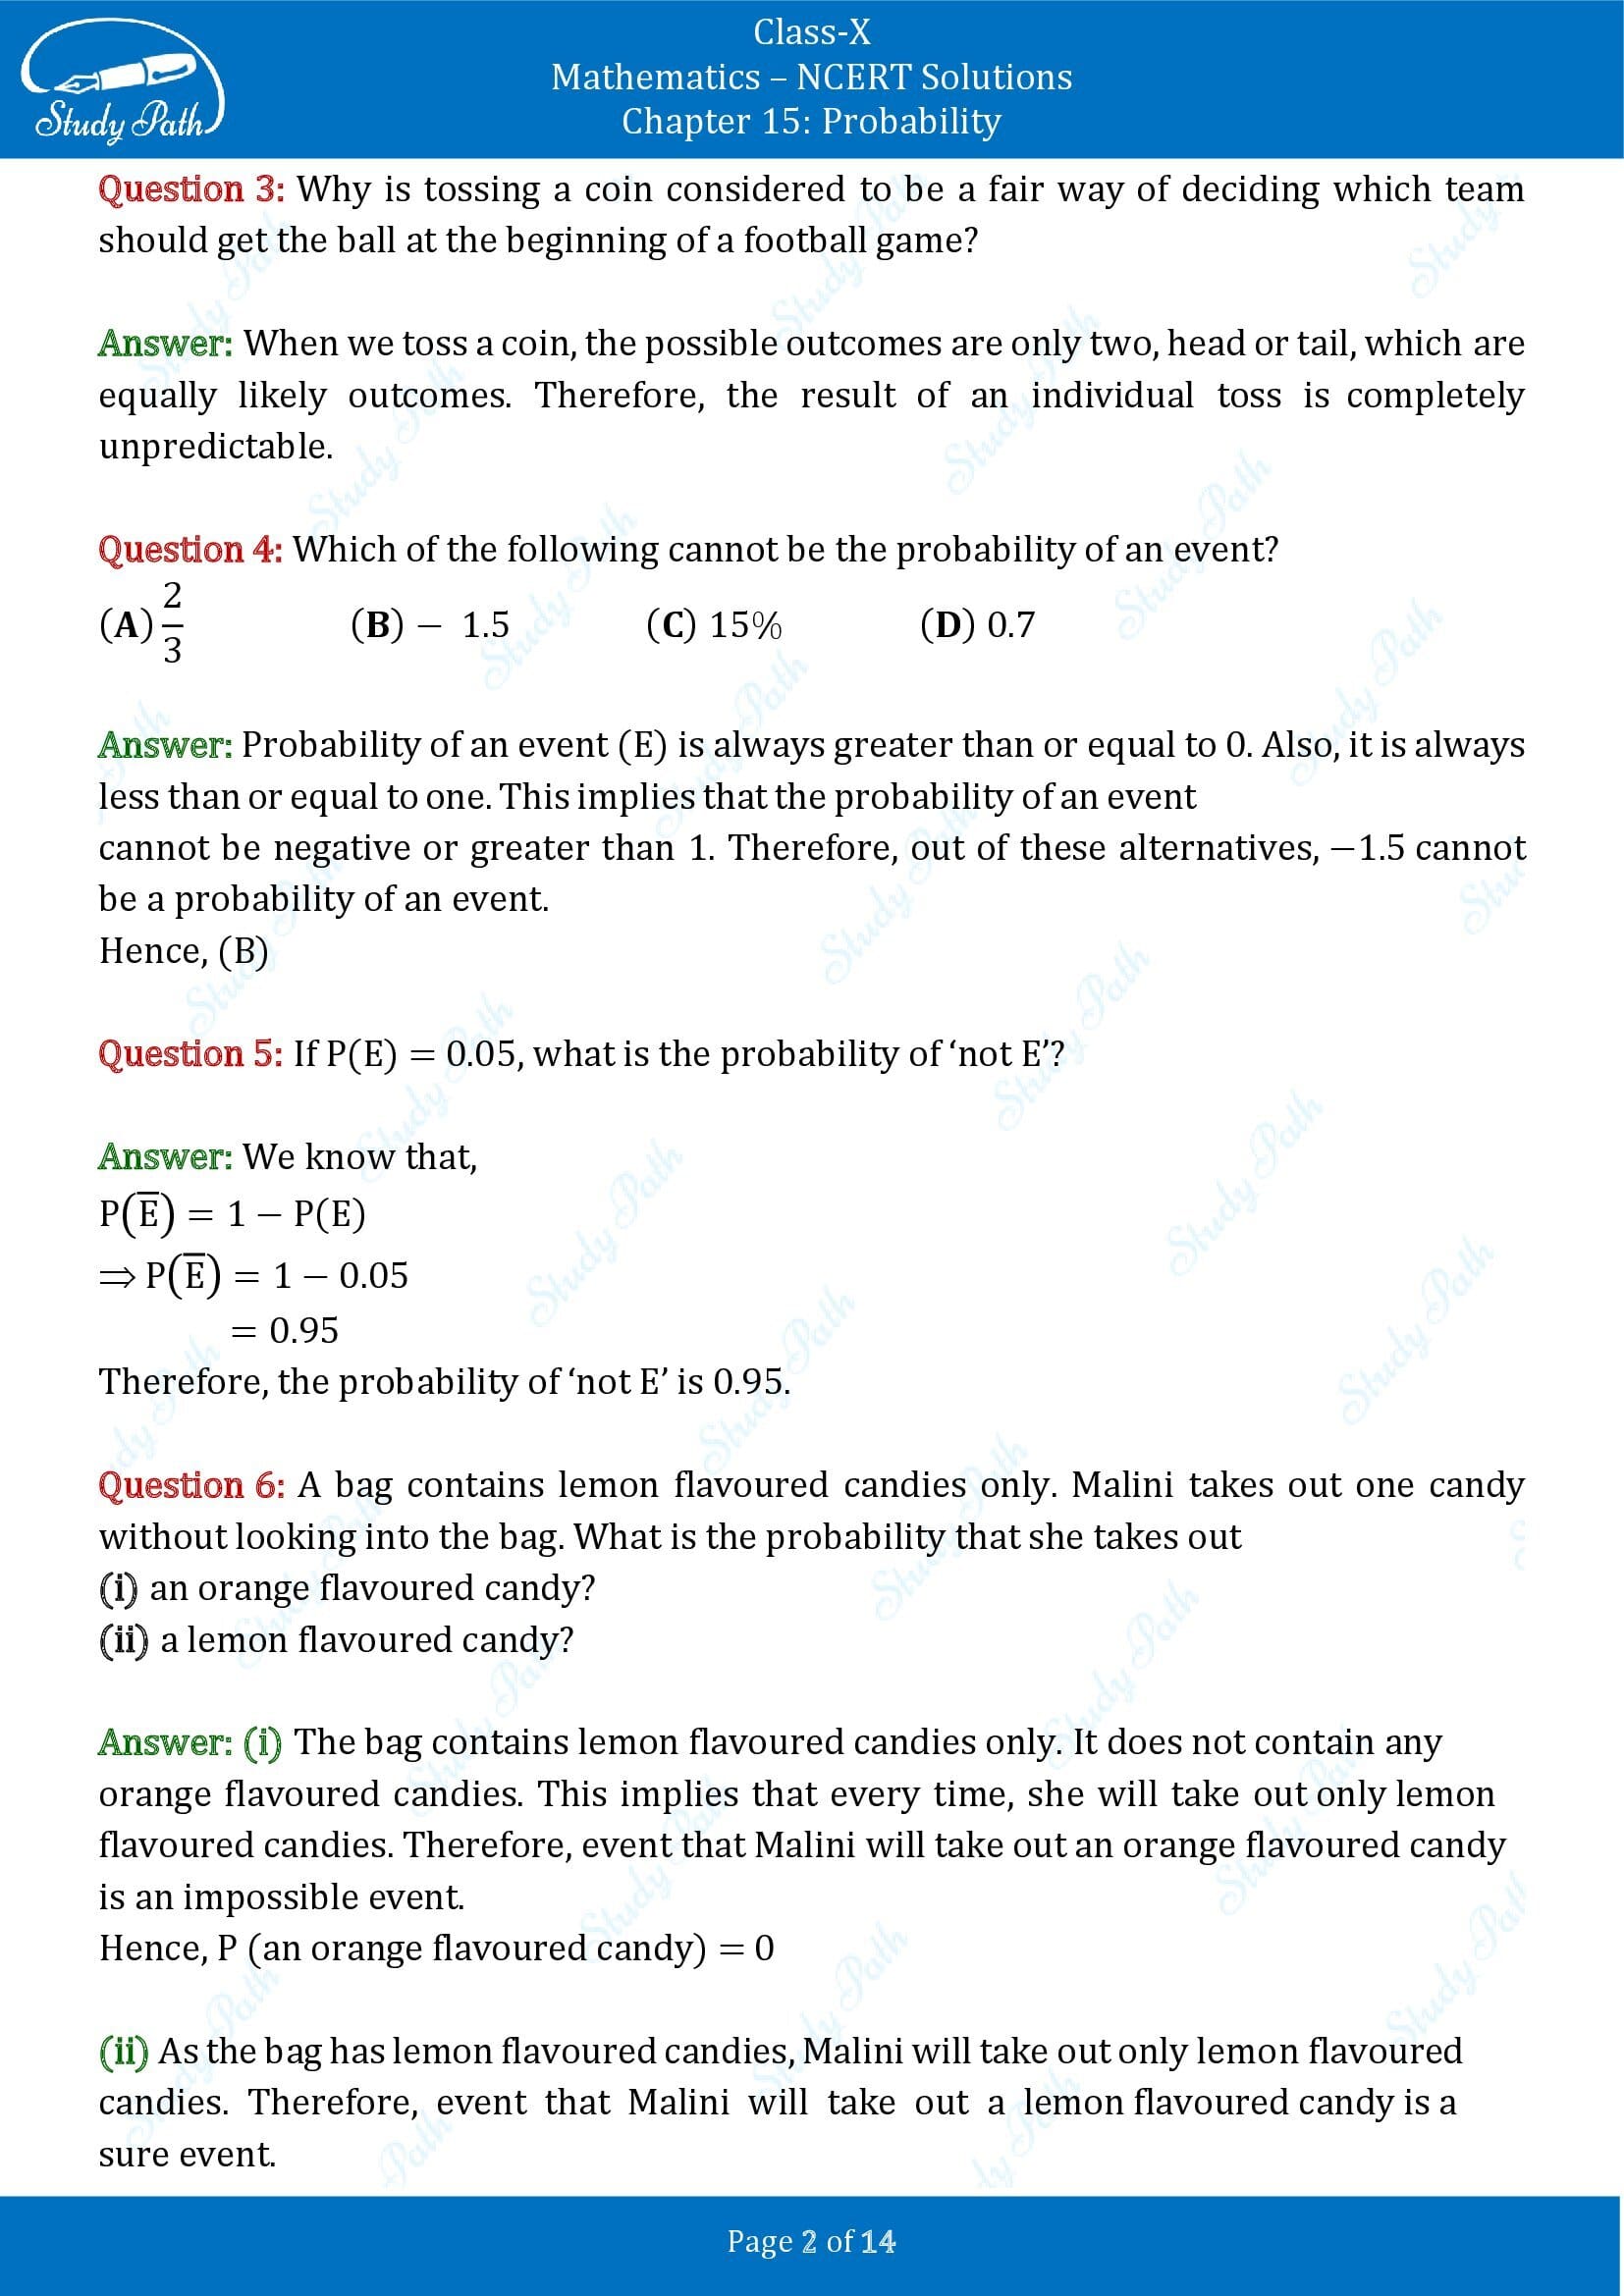 NCERT Solutions for Class 10 Maths Chapter 15 Probability Exercise 15.1 00002